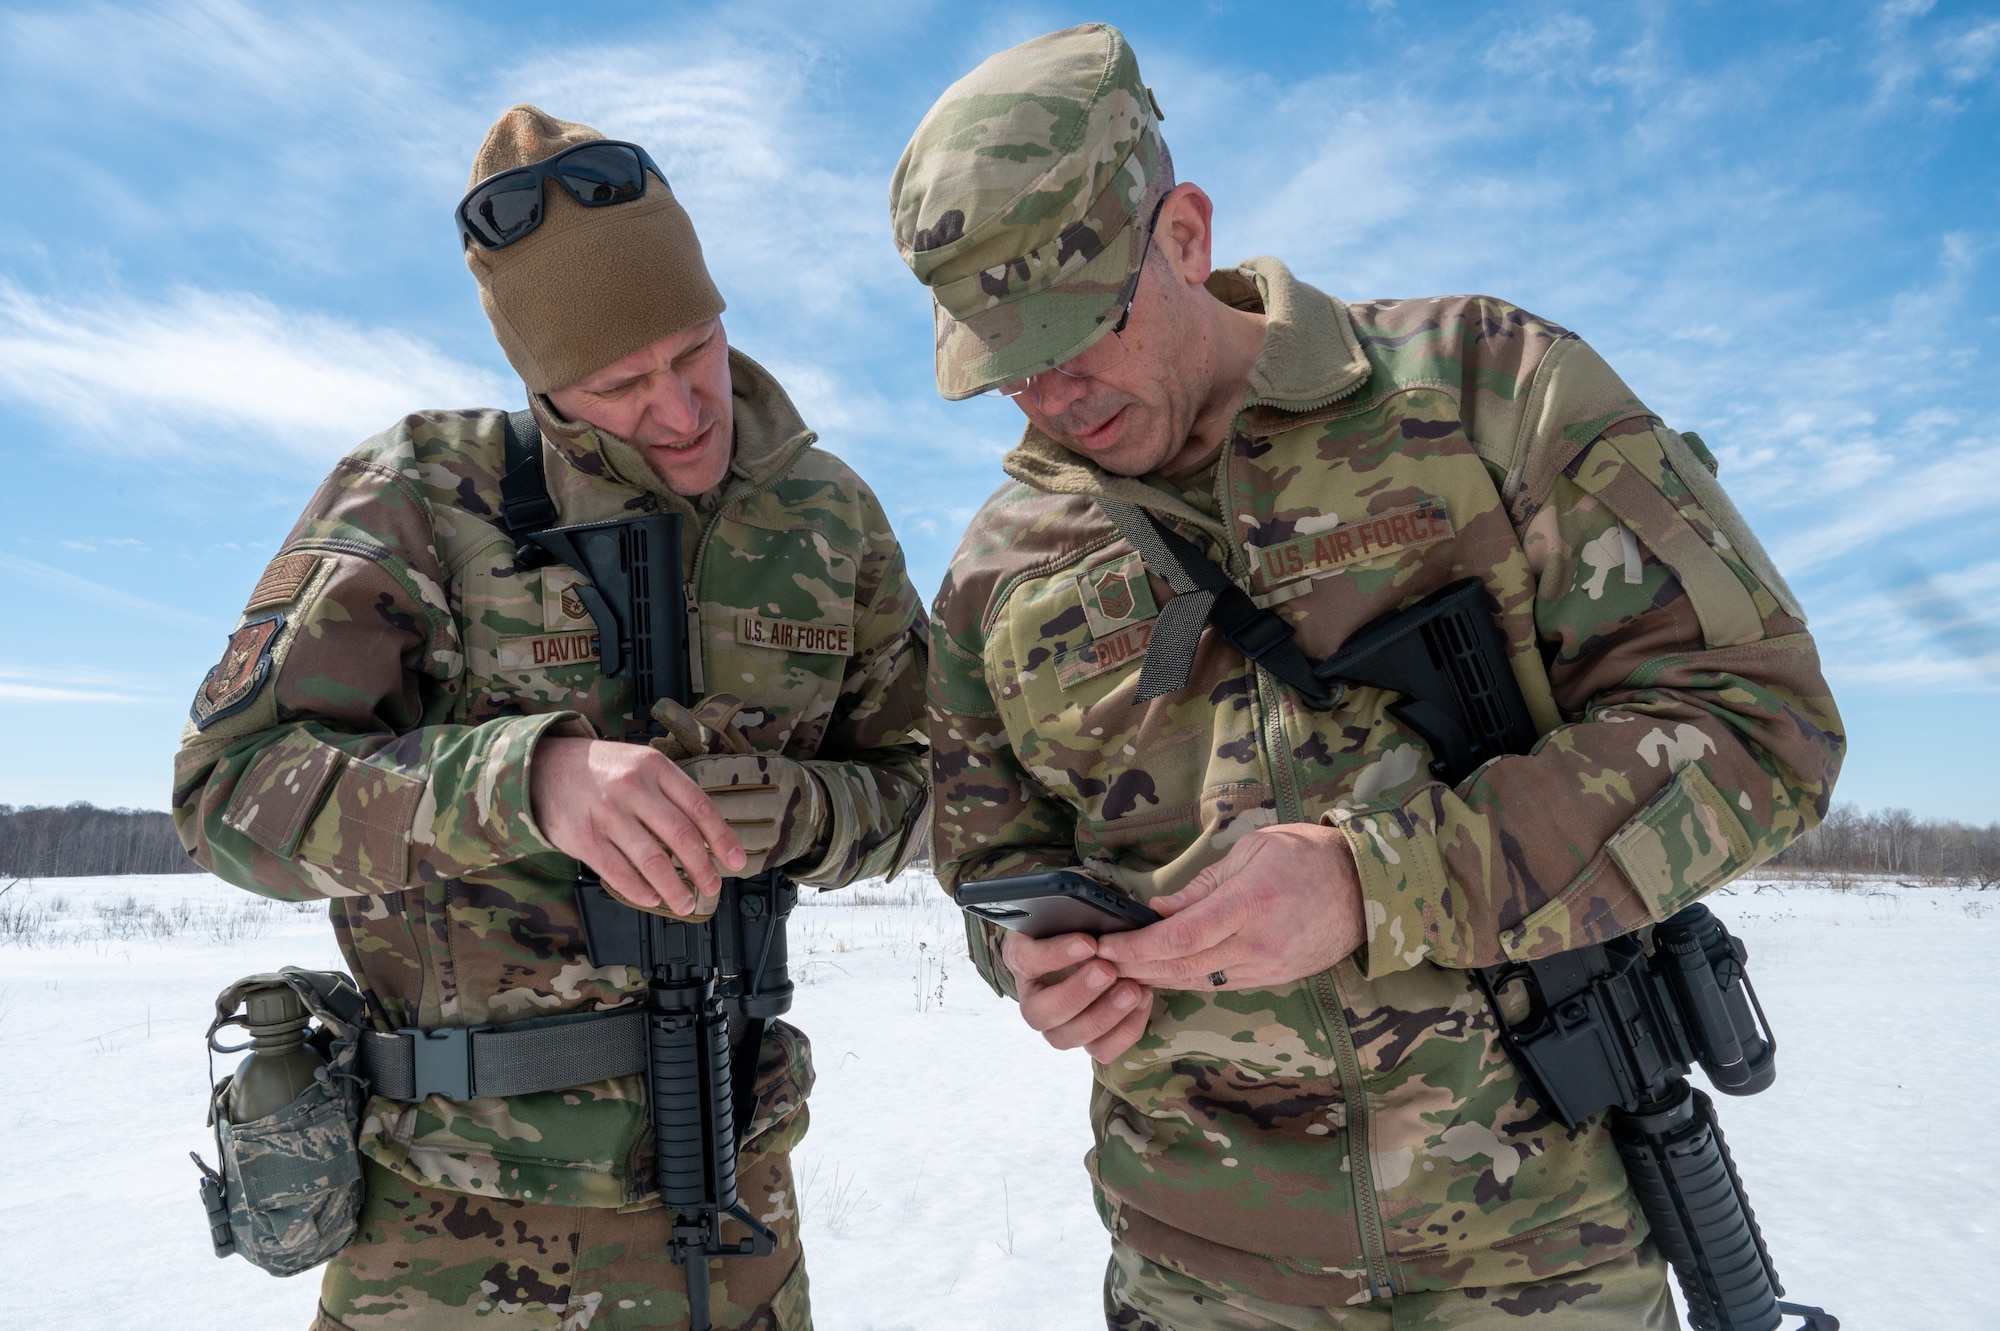 Master Sgt. Jonathan Davidson, a 934th Civil Engineering Squadron firefighter, and U.S. Senior Master Sgt. Patrick Dulzo, the 934 CES First Sgt., right, check their position via GPS during a land navigation course at Camp Ripley, Minnesota, on April 2, 2023. The 934 CES conducted a field training exercise, including land navigation and general tent setup (U.S. Air Force photo by Senior Airman Matthew Reisdorf)